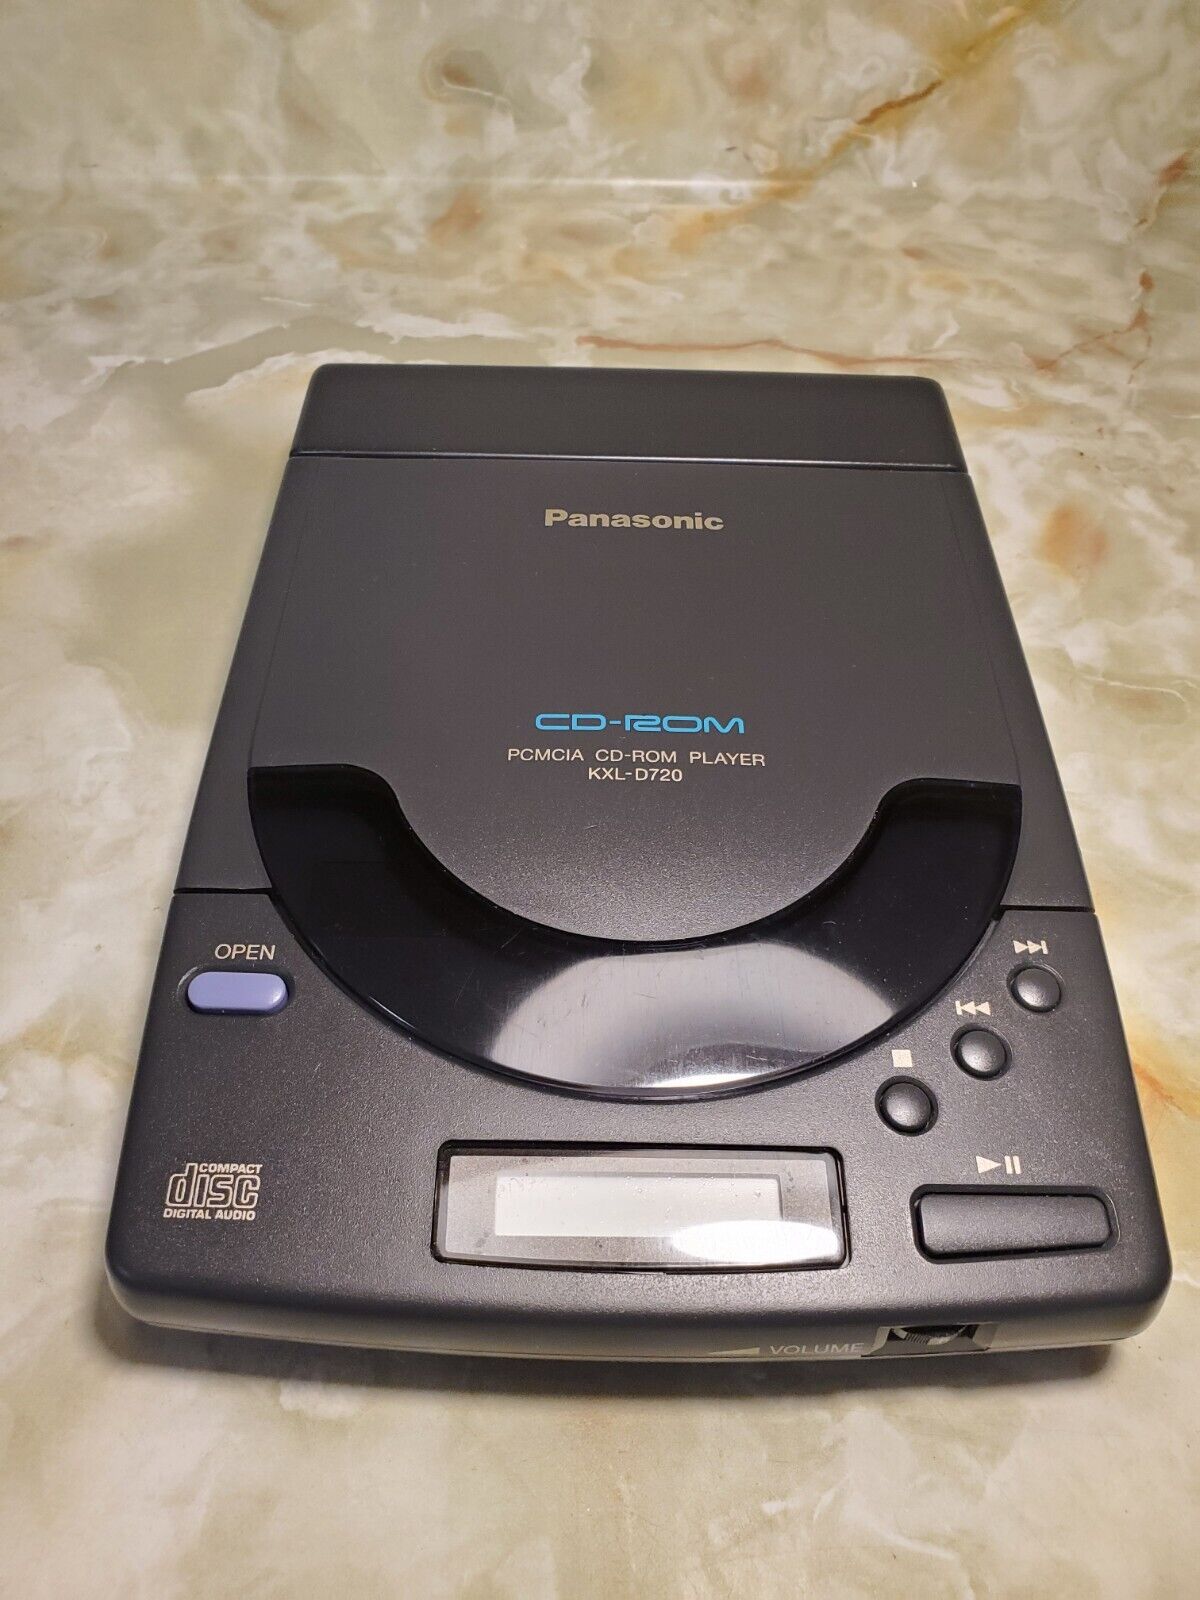 Panasonic KXL-D720 PCMCIA CD-ROM with AC Adpater.. WONT READ DISC